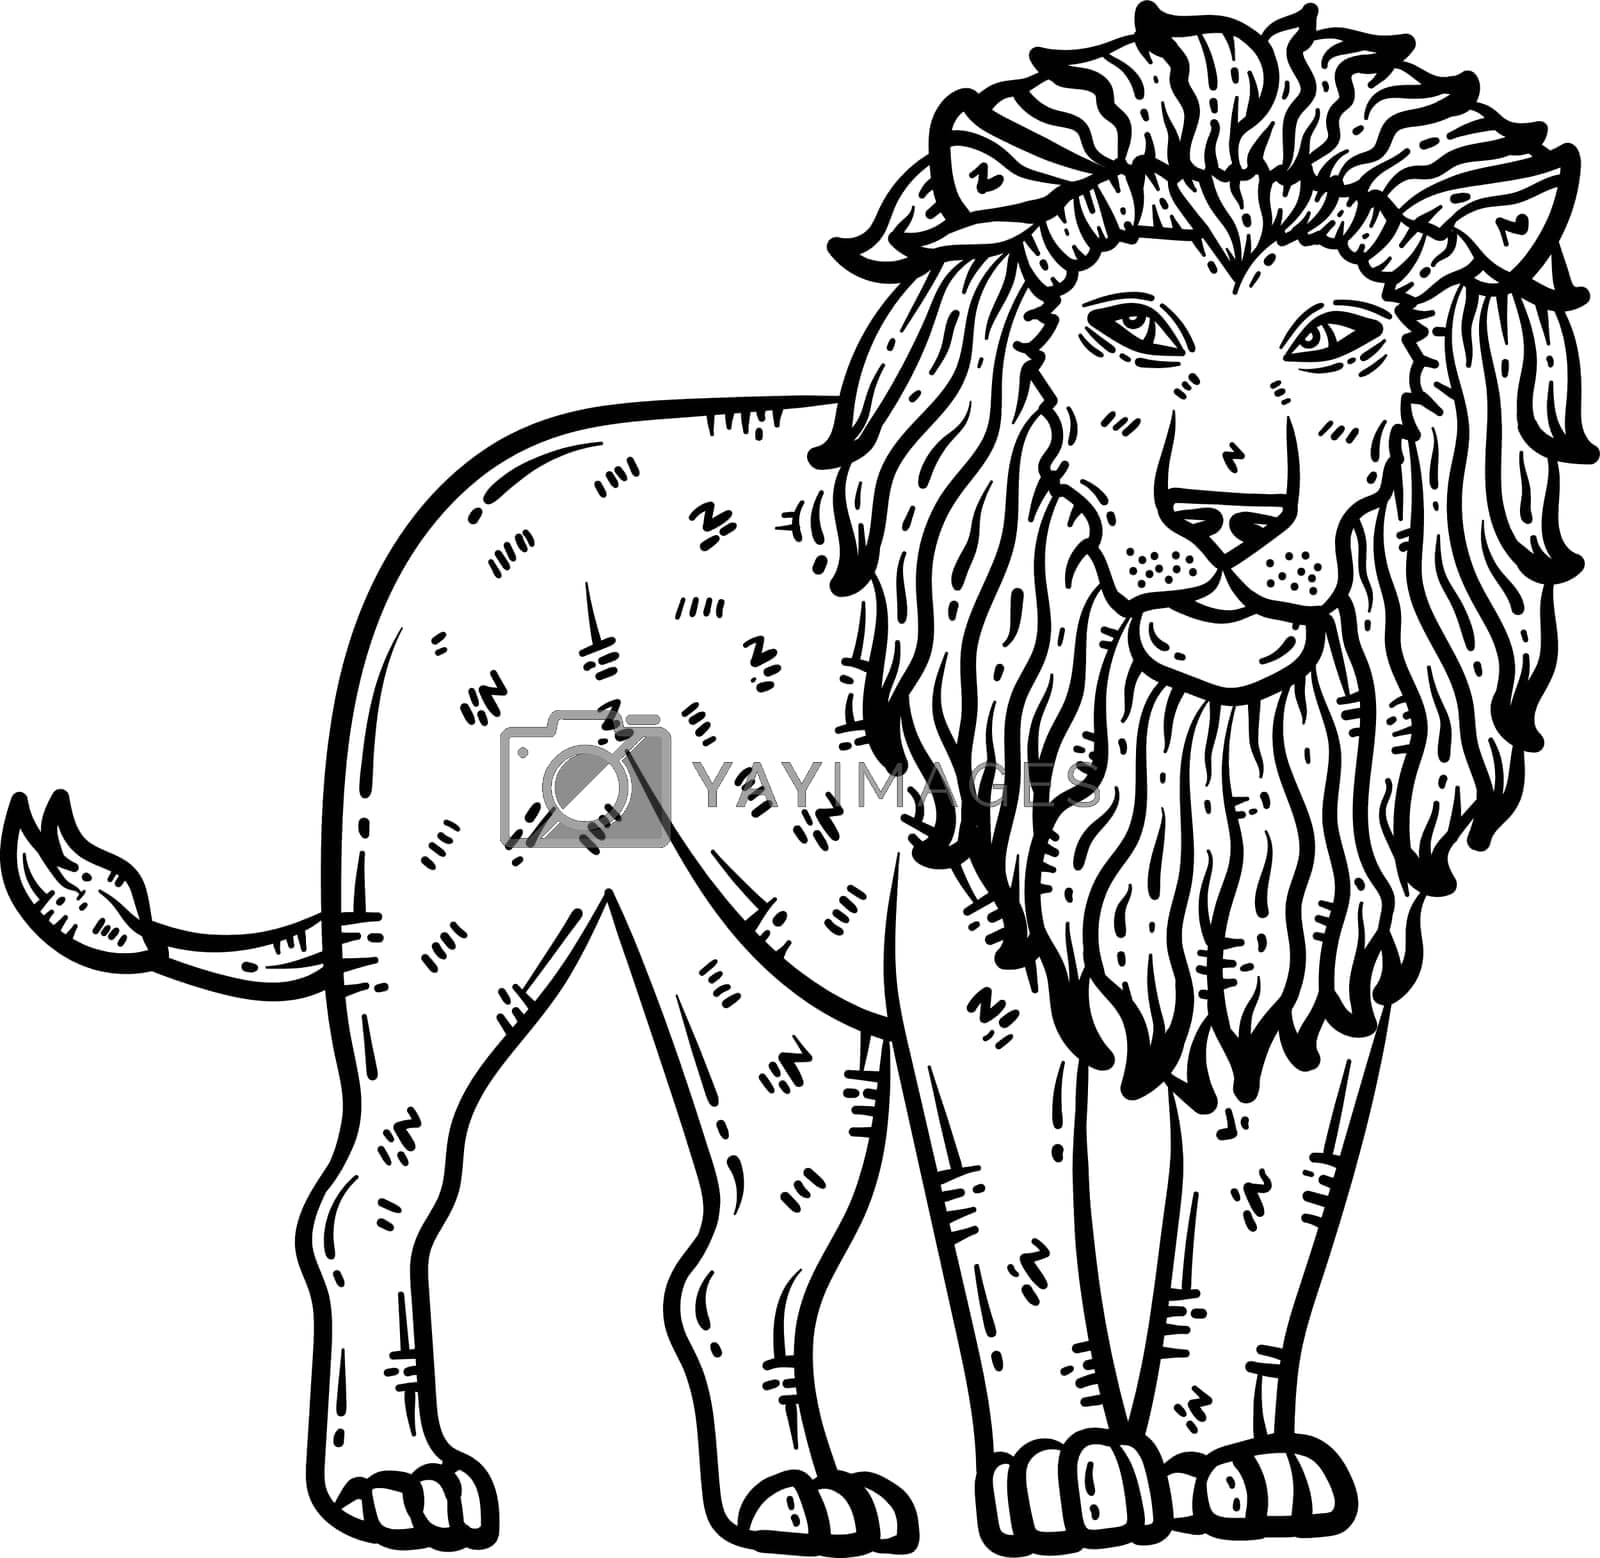 Royalty free image of Lion Animal Coloring Page for Adult by abbydesign